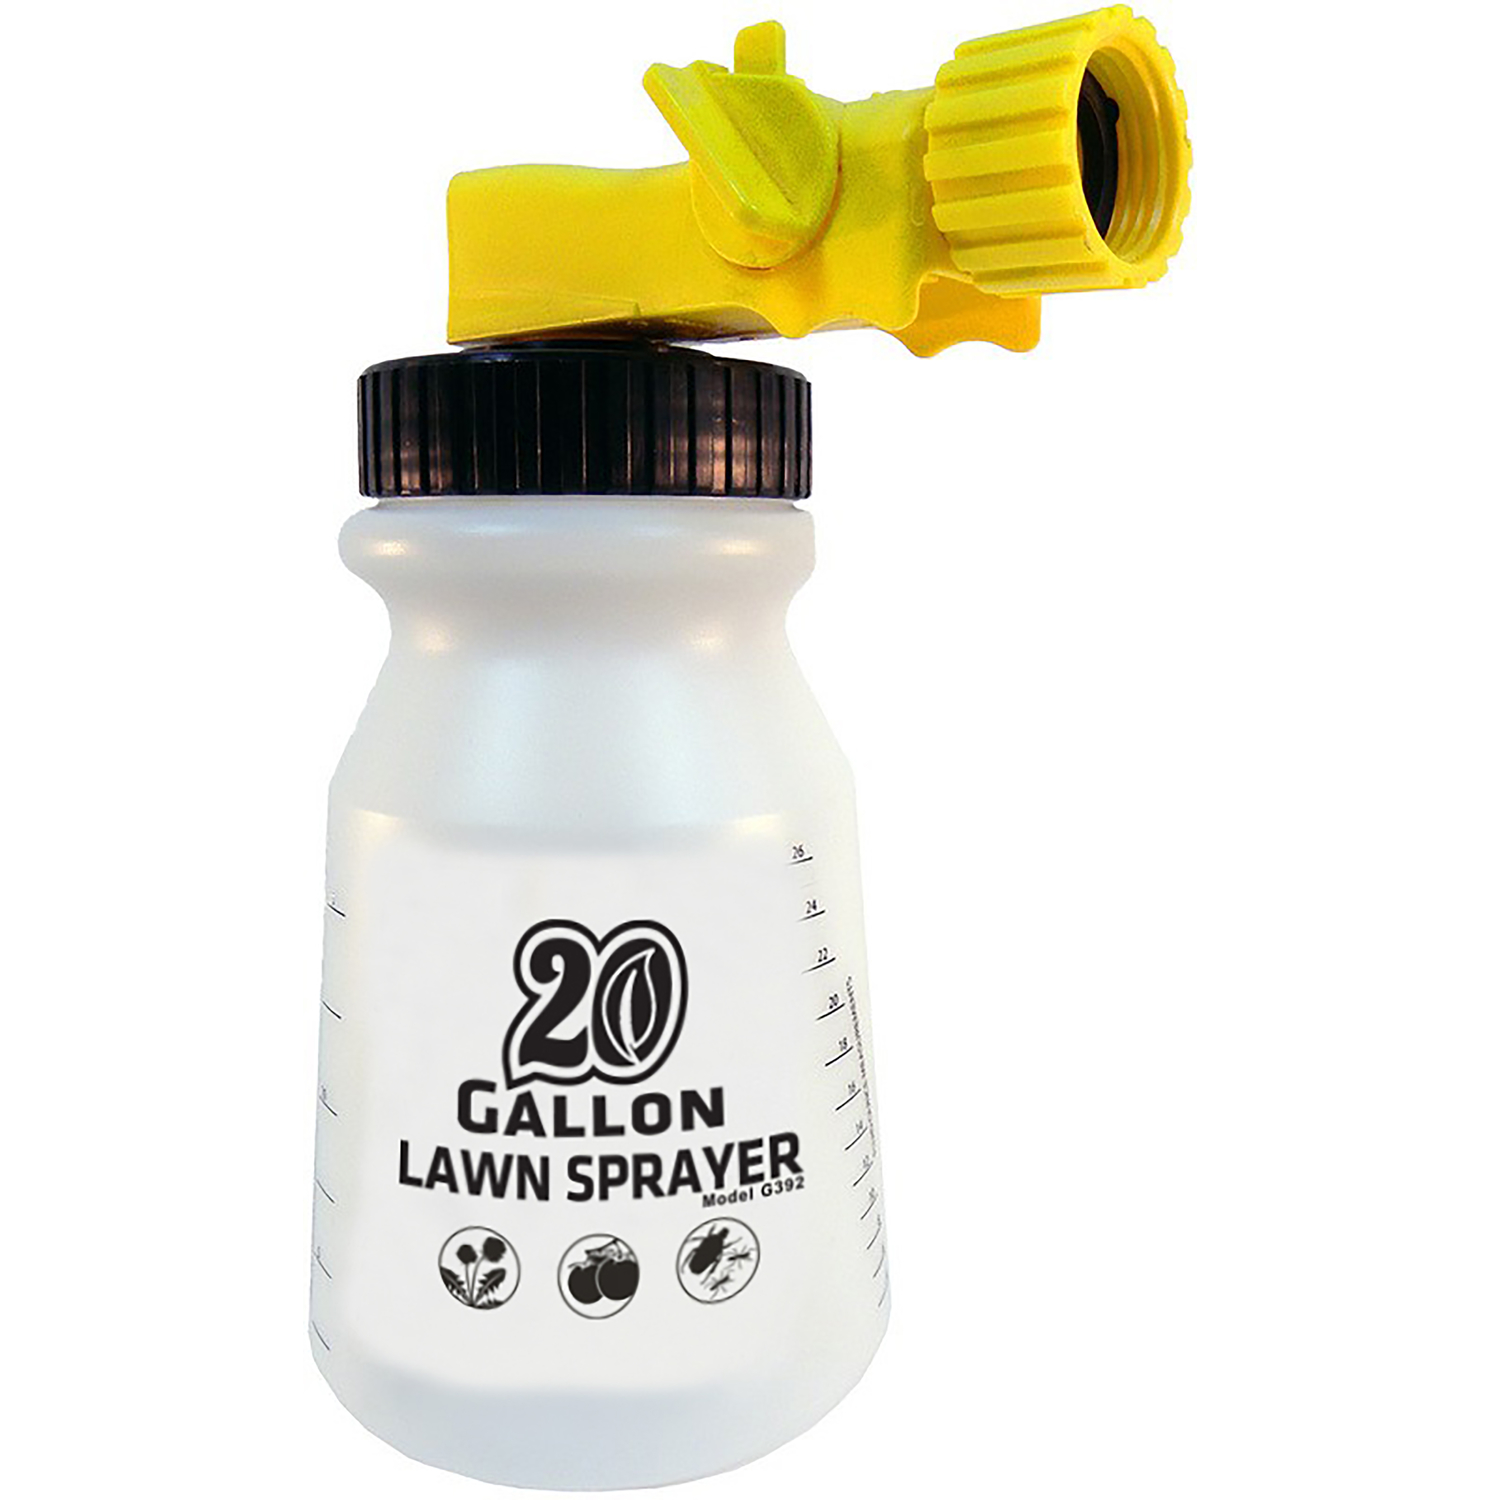 Combination Pack - 2 gallons of Salts Gone™, Hose End Sprayer and Rust